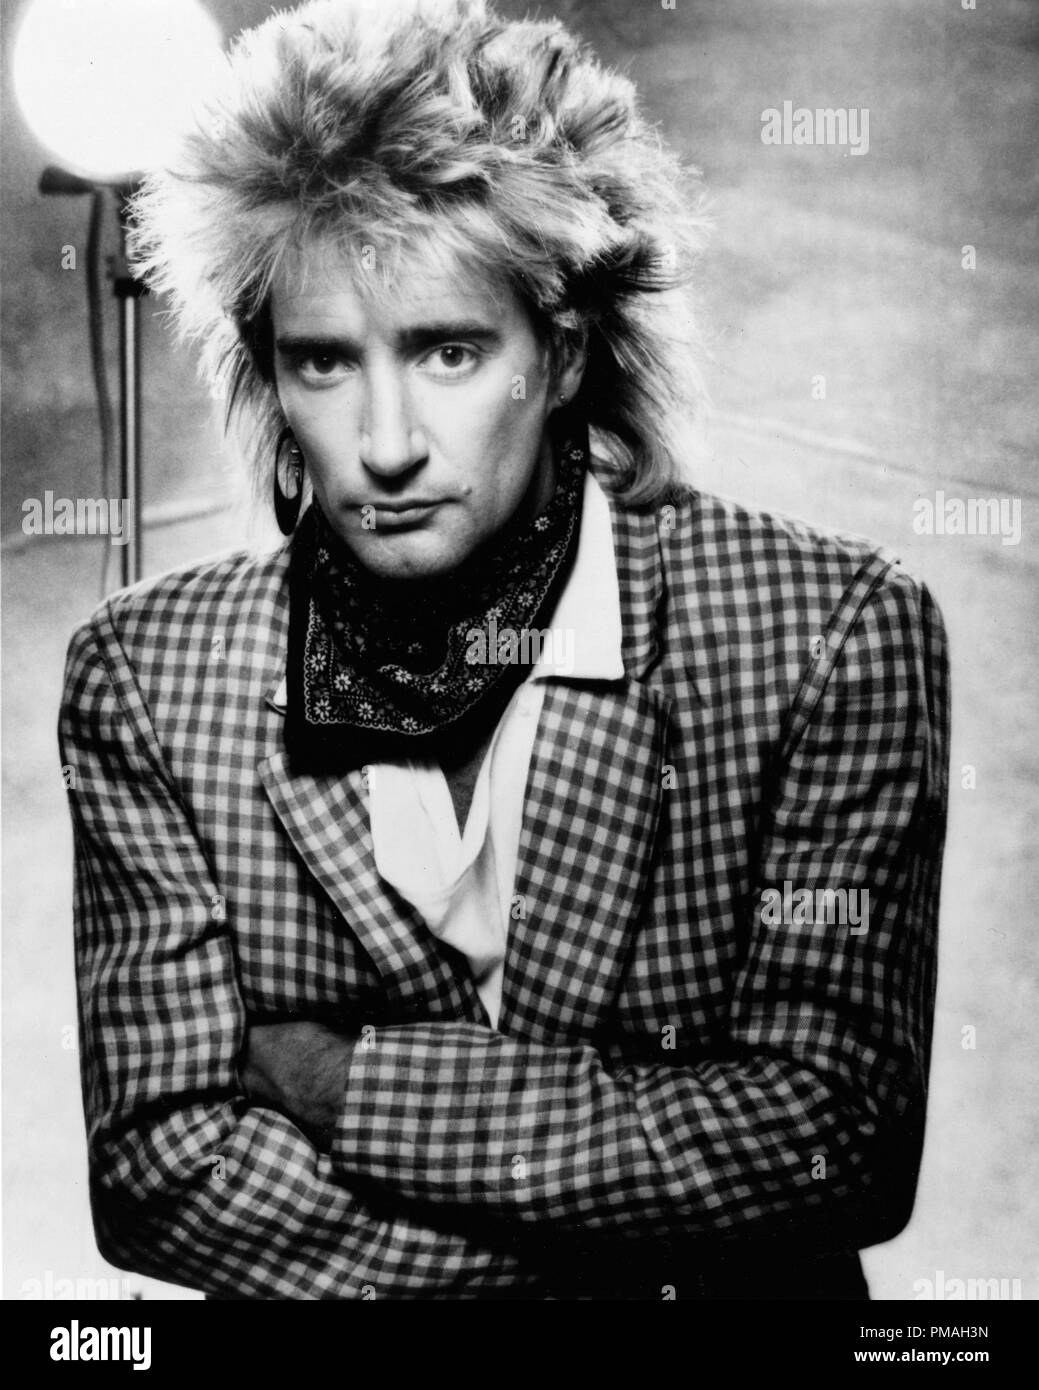 Publicity photo of Rod Stewart, circa 1987  File Reference # 32733 417THA Stock Photo